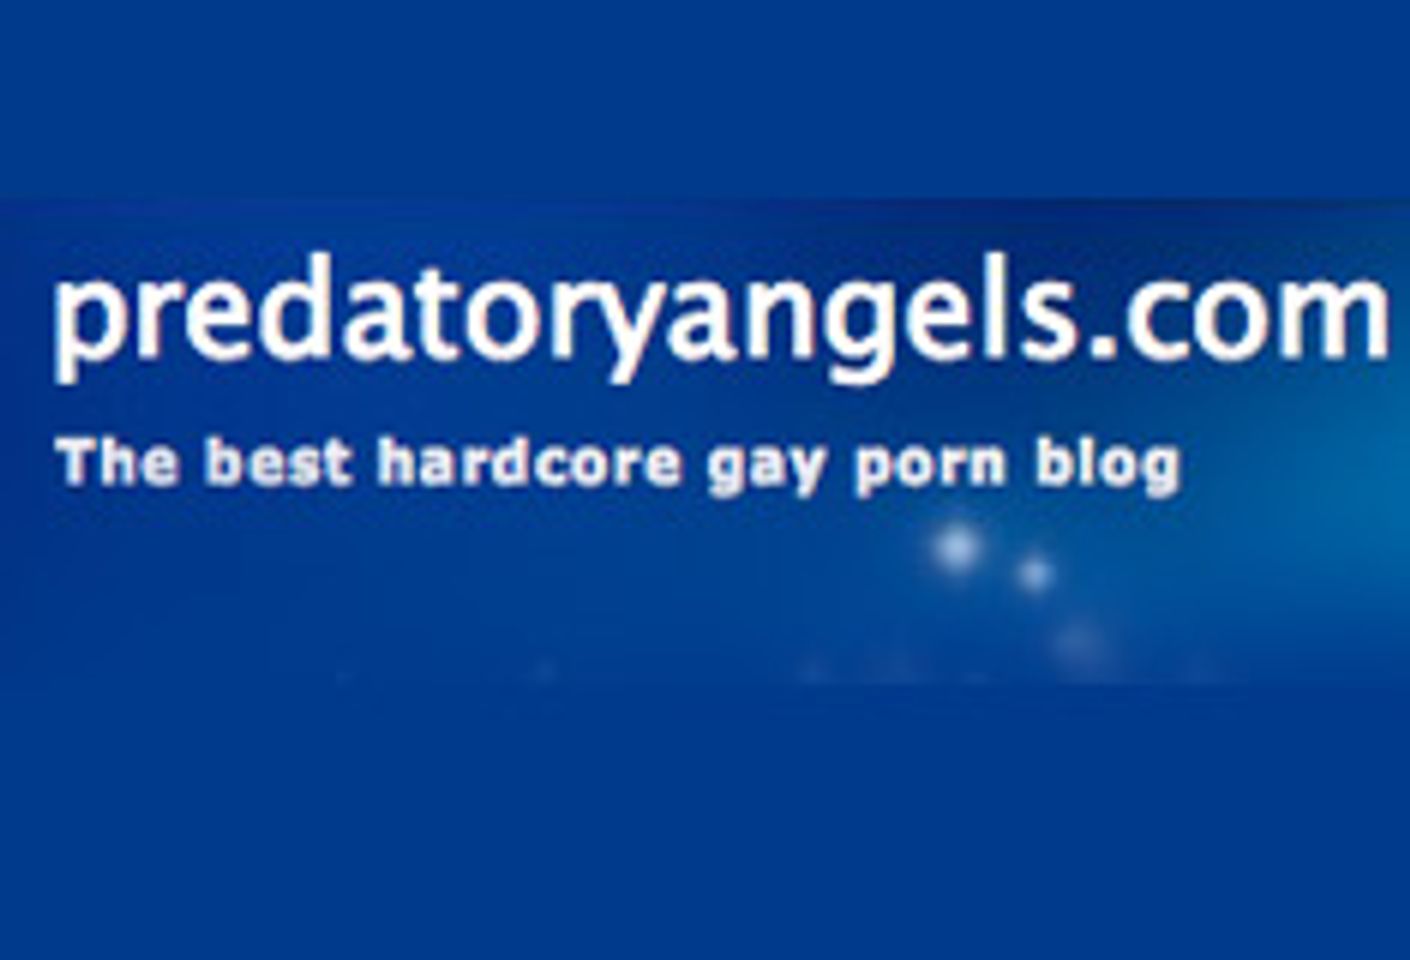 Predatory Angel Offers Promotional Giveaways in February